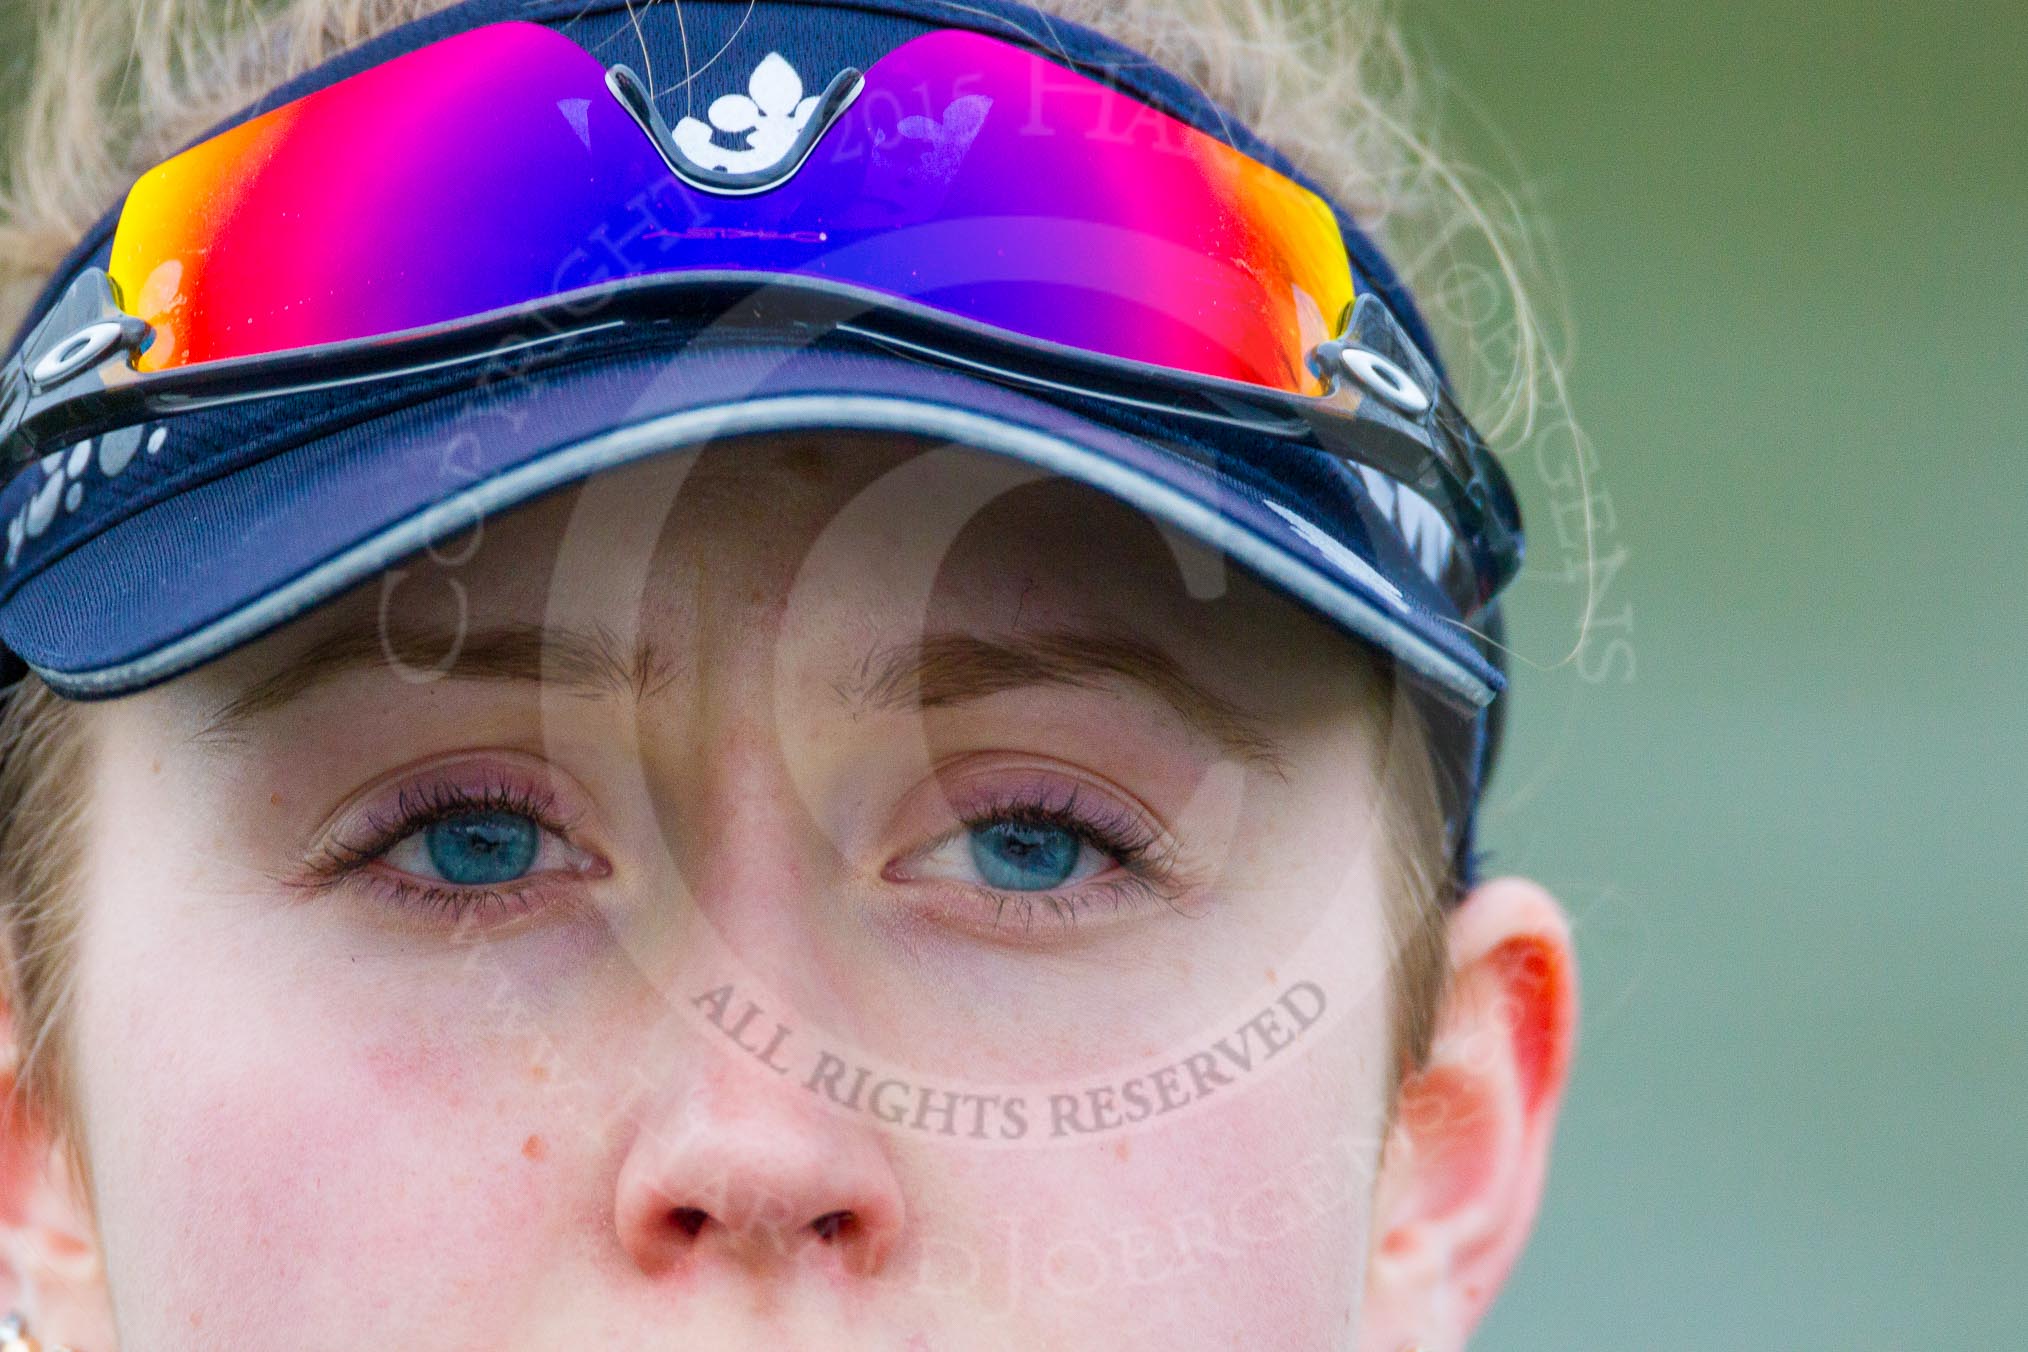 The Boat Race season 2016 - OUWBC training Wallingford: The eyes of Maddy Badcott, OUWBC president and 7 seat in the Oxford Blue Boat.
River Thames,
Wallingford,
Oxfordshire,

on 29 February 2016 at 15:56, image #74